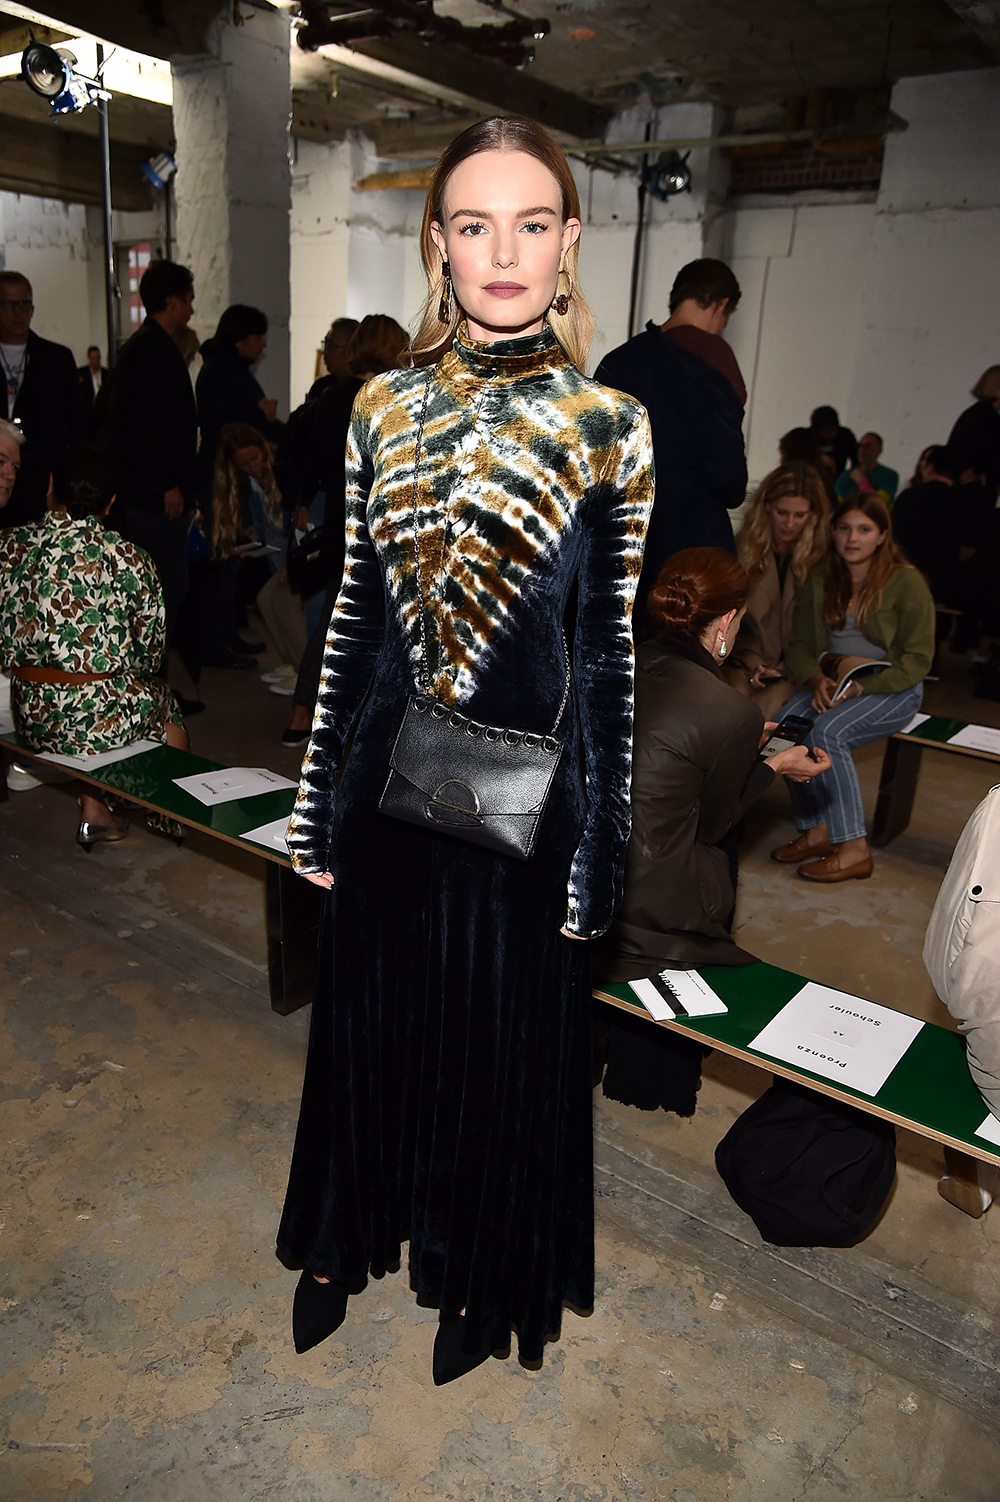 NEW YORK, NY - SEPTEMBER 10: Kate Bosworth attends Proenza Schouler - Front Row - September 2018 - New York Fashion Week at 30 Wall Street on September 10, 2018 in New York City. (Photo by Theo Wargo/Getty Images)